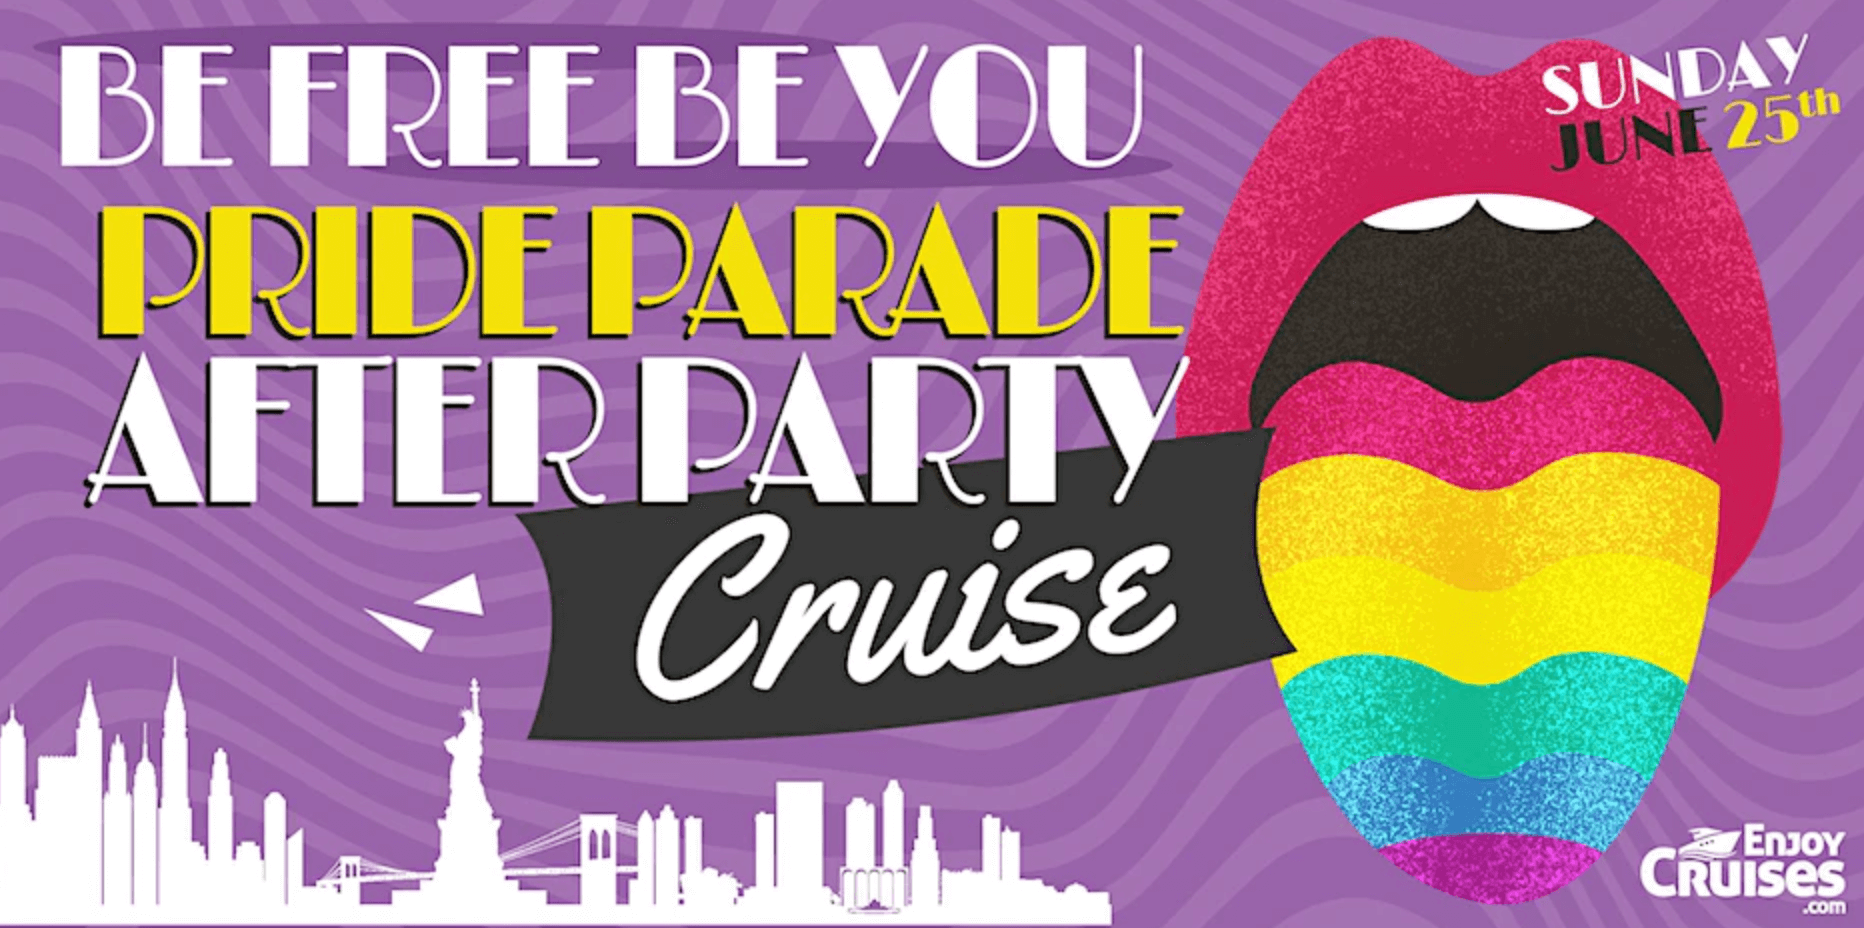 Be Free, Be You - NYC Pride Parade After Party Cruise